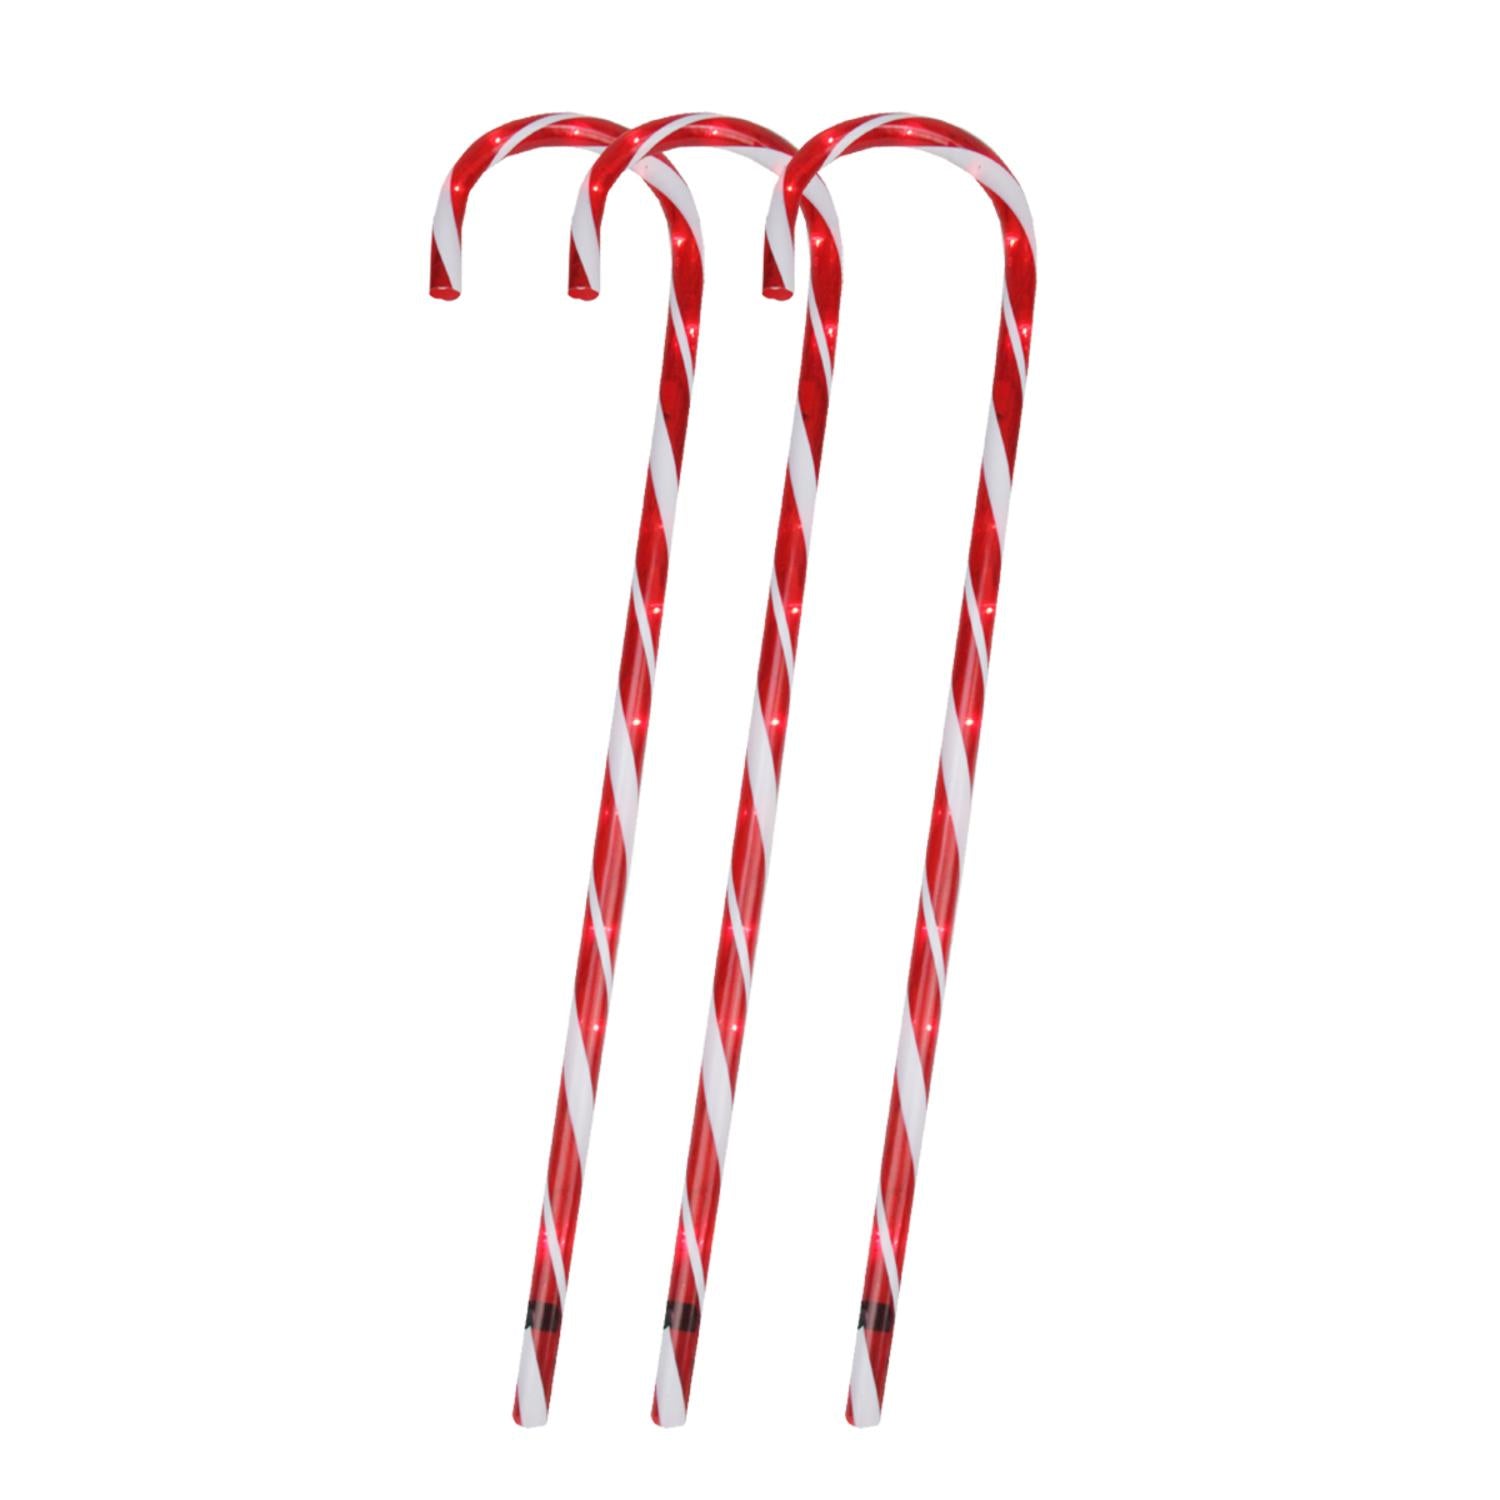 Pack of 3 Lighted Candy Cane Pathway Markers Outdoor Christmas Decorations 28"